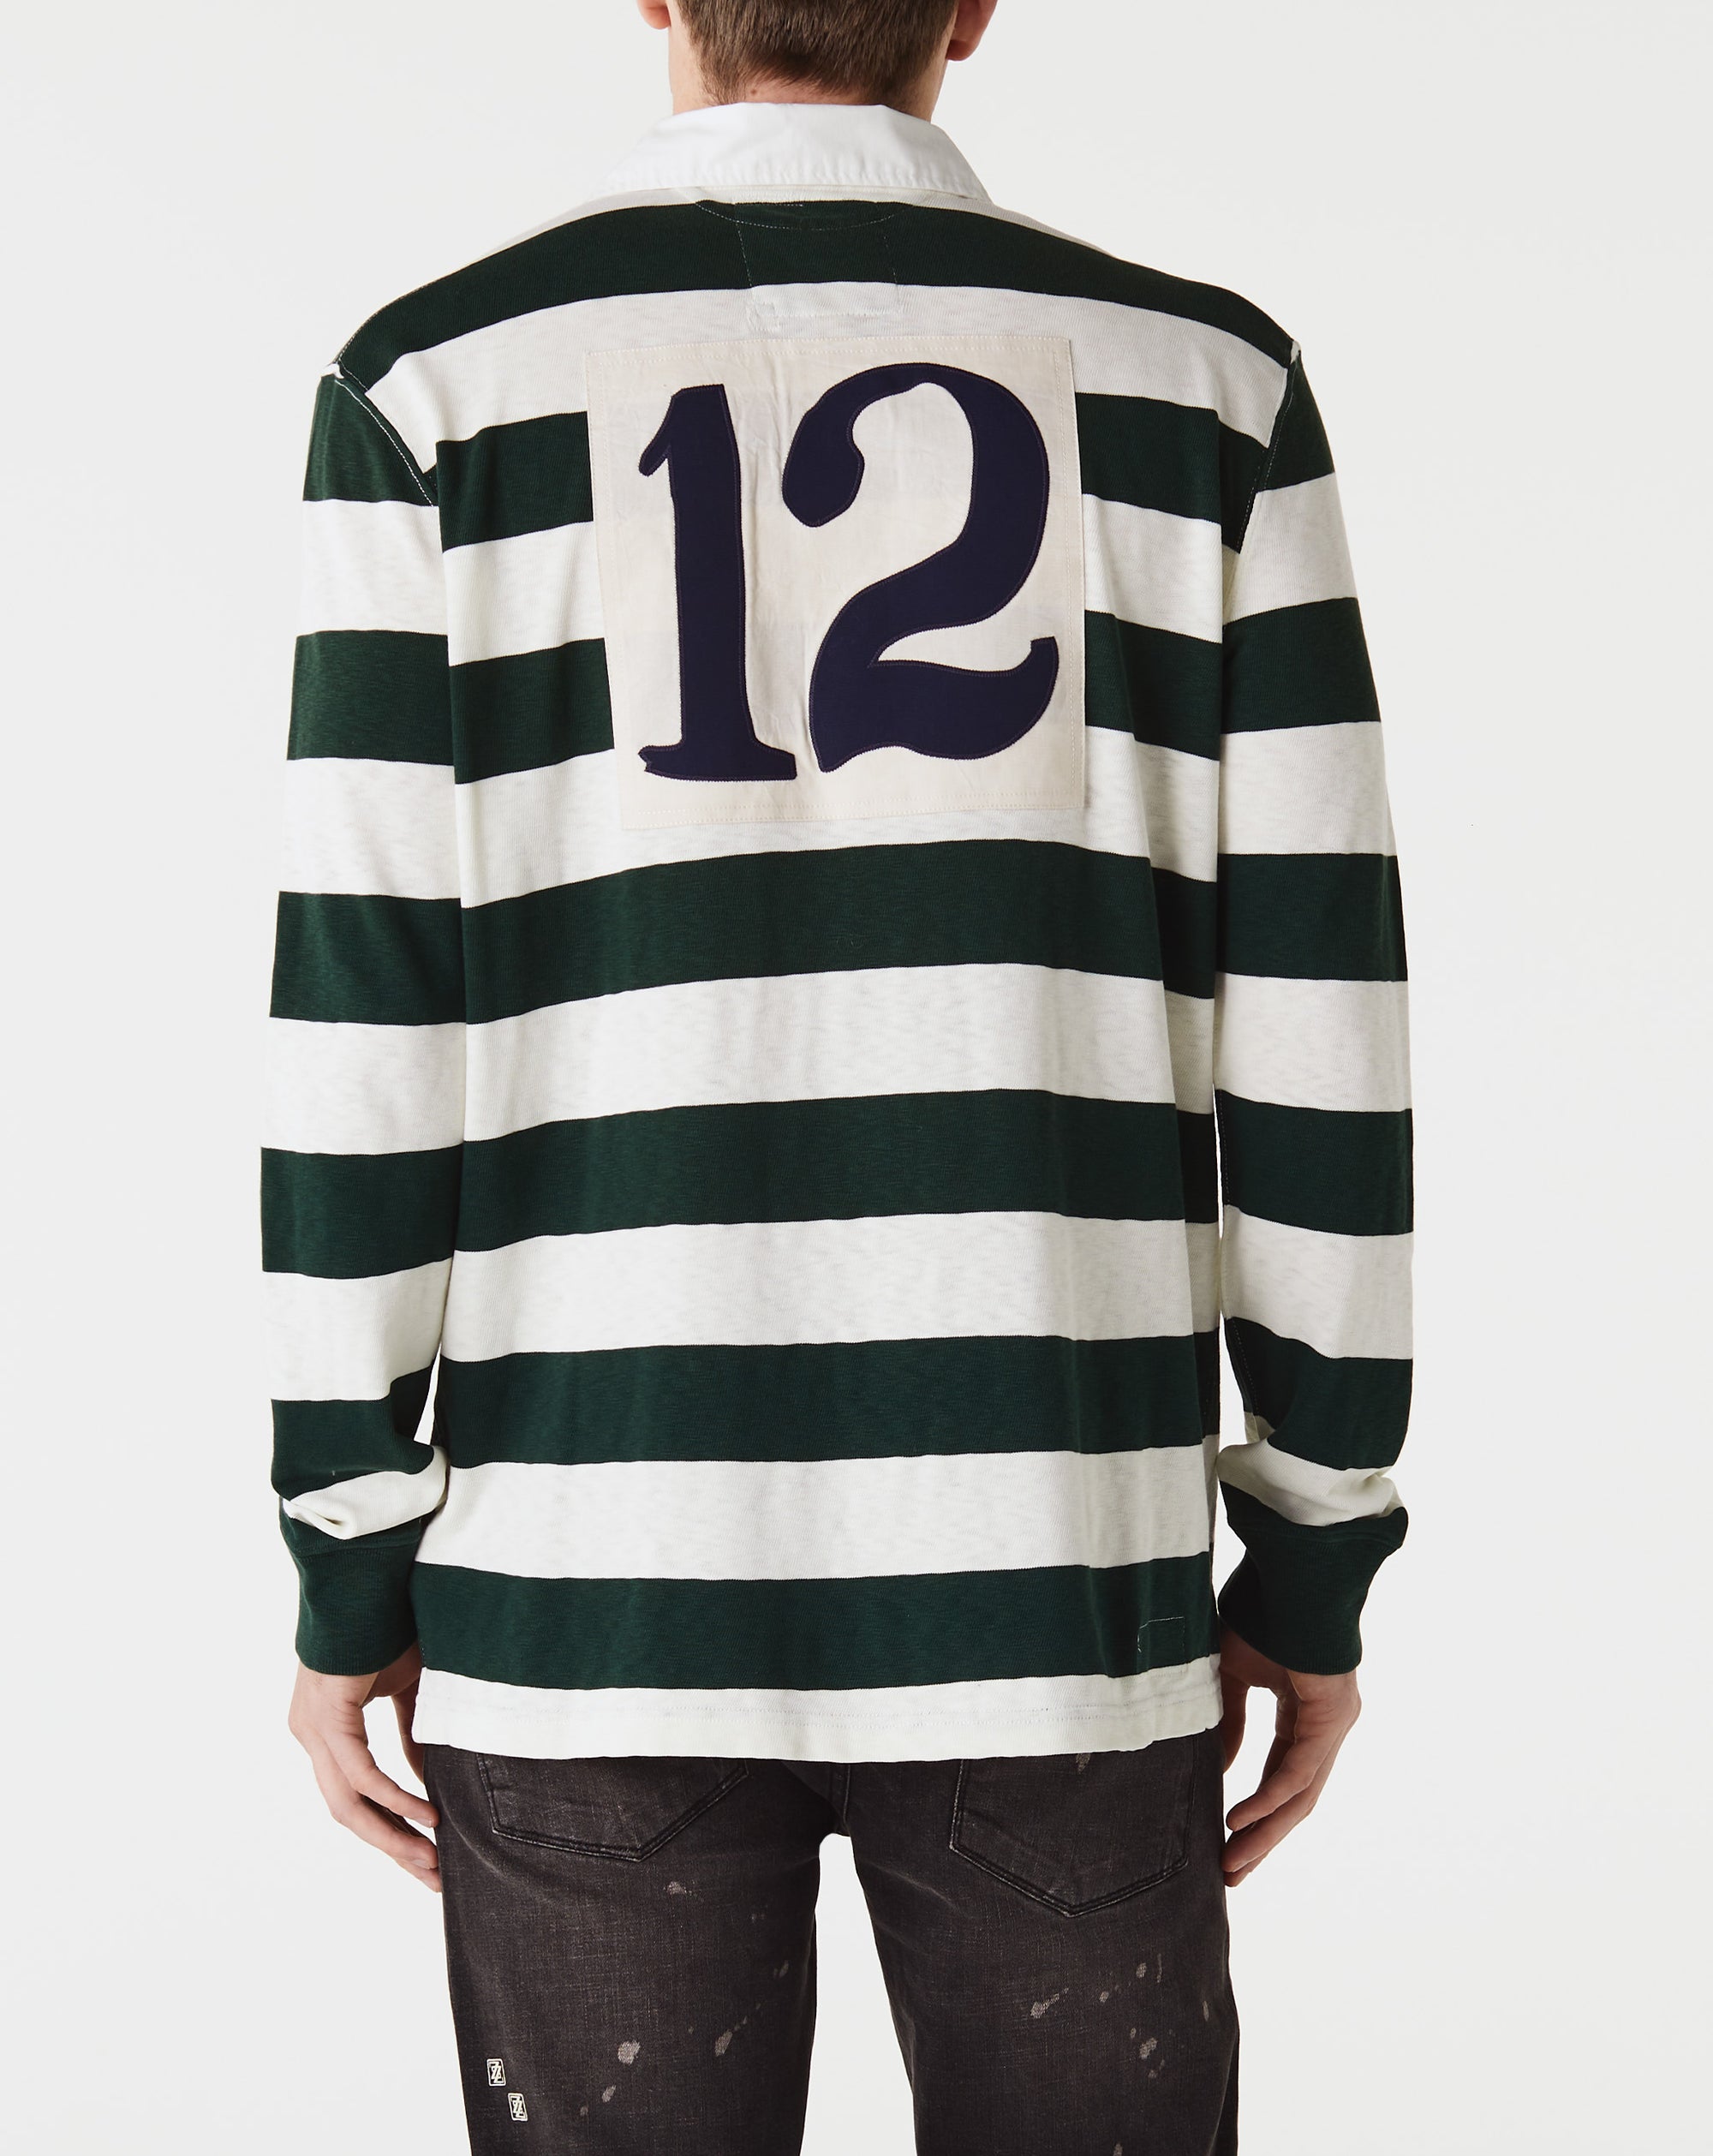 Polo Ralph Lauren Stripe Rugby Shirt - Rule of Next Apparel